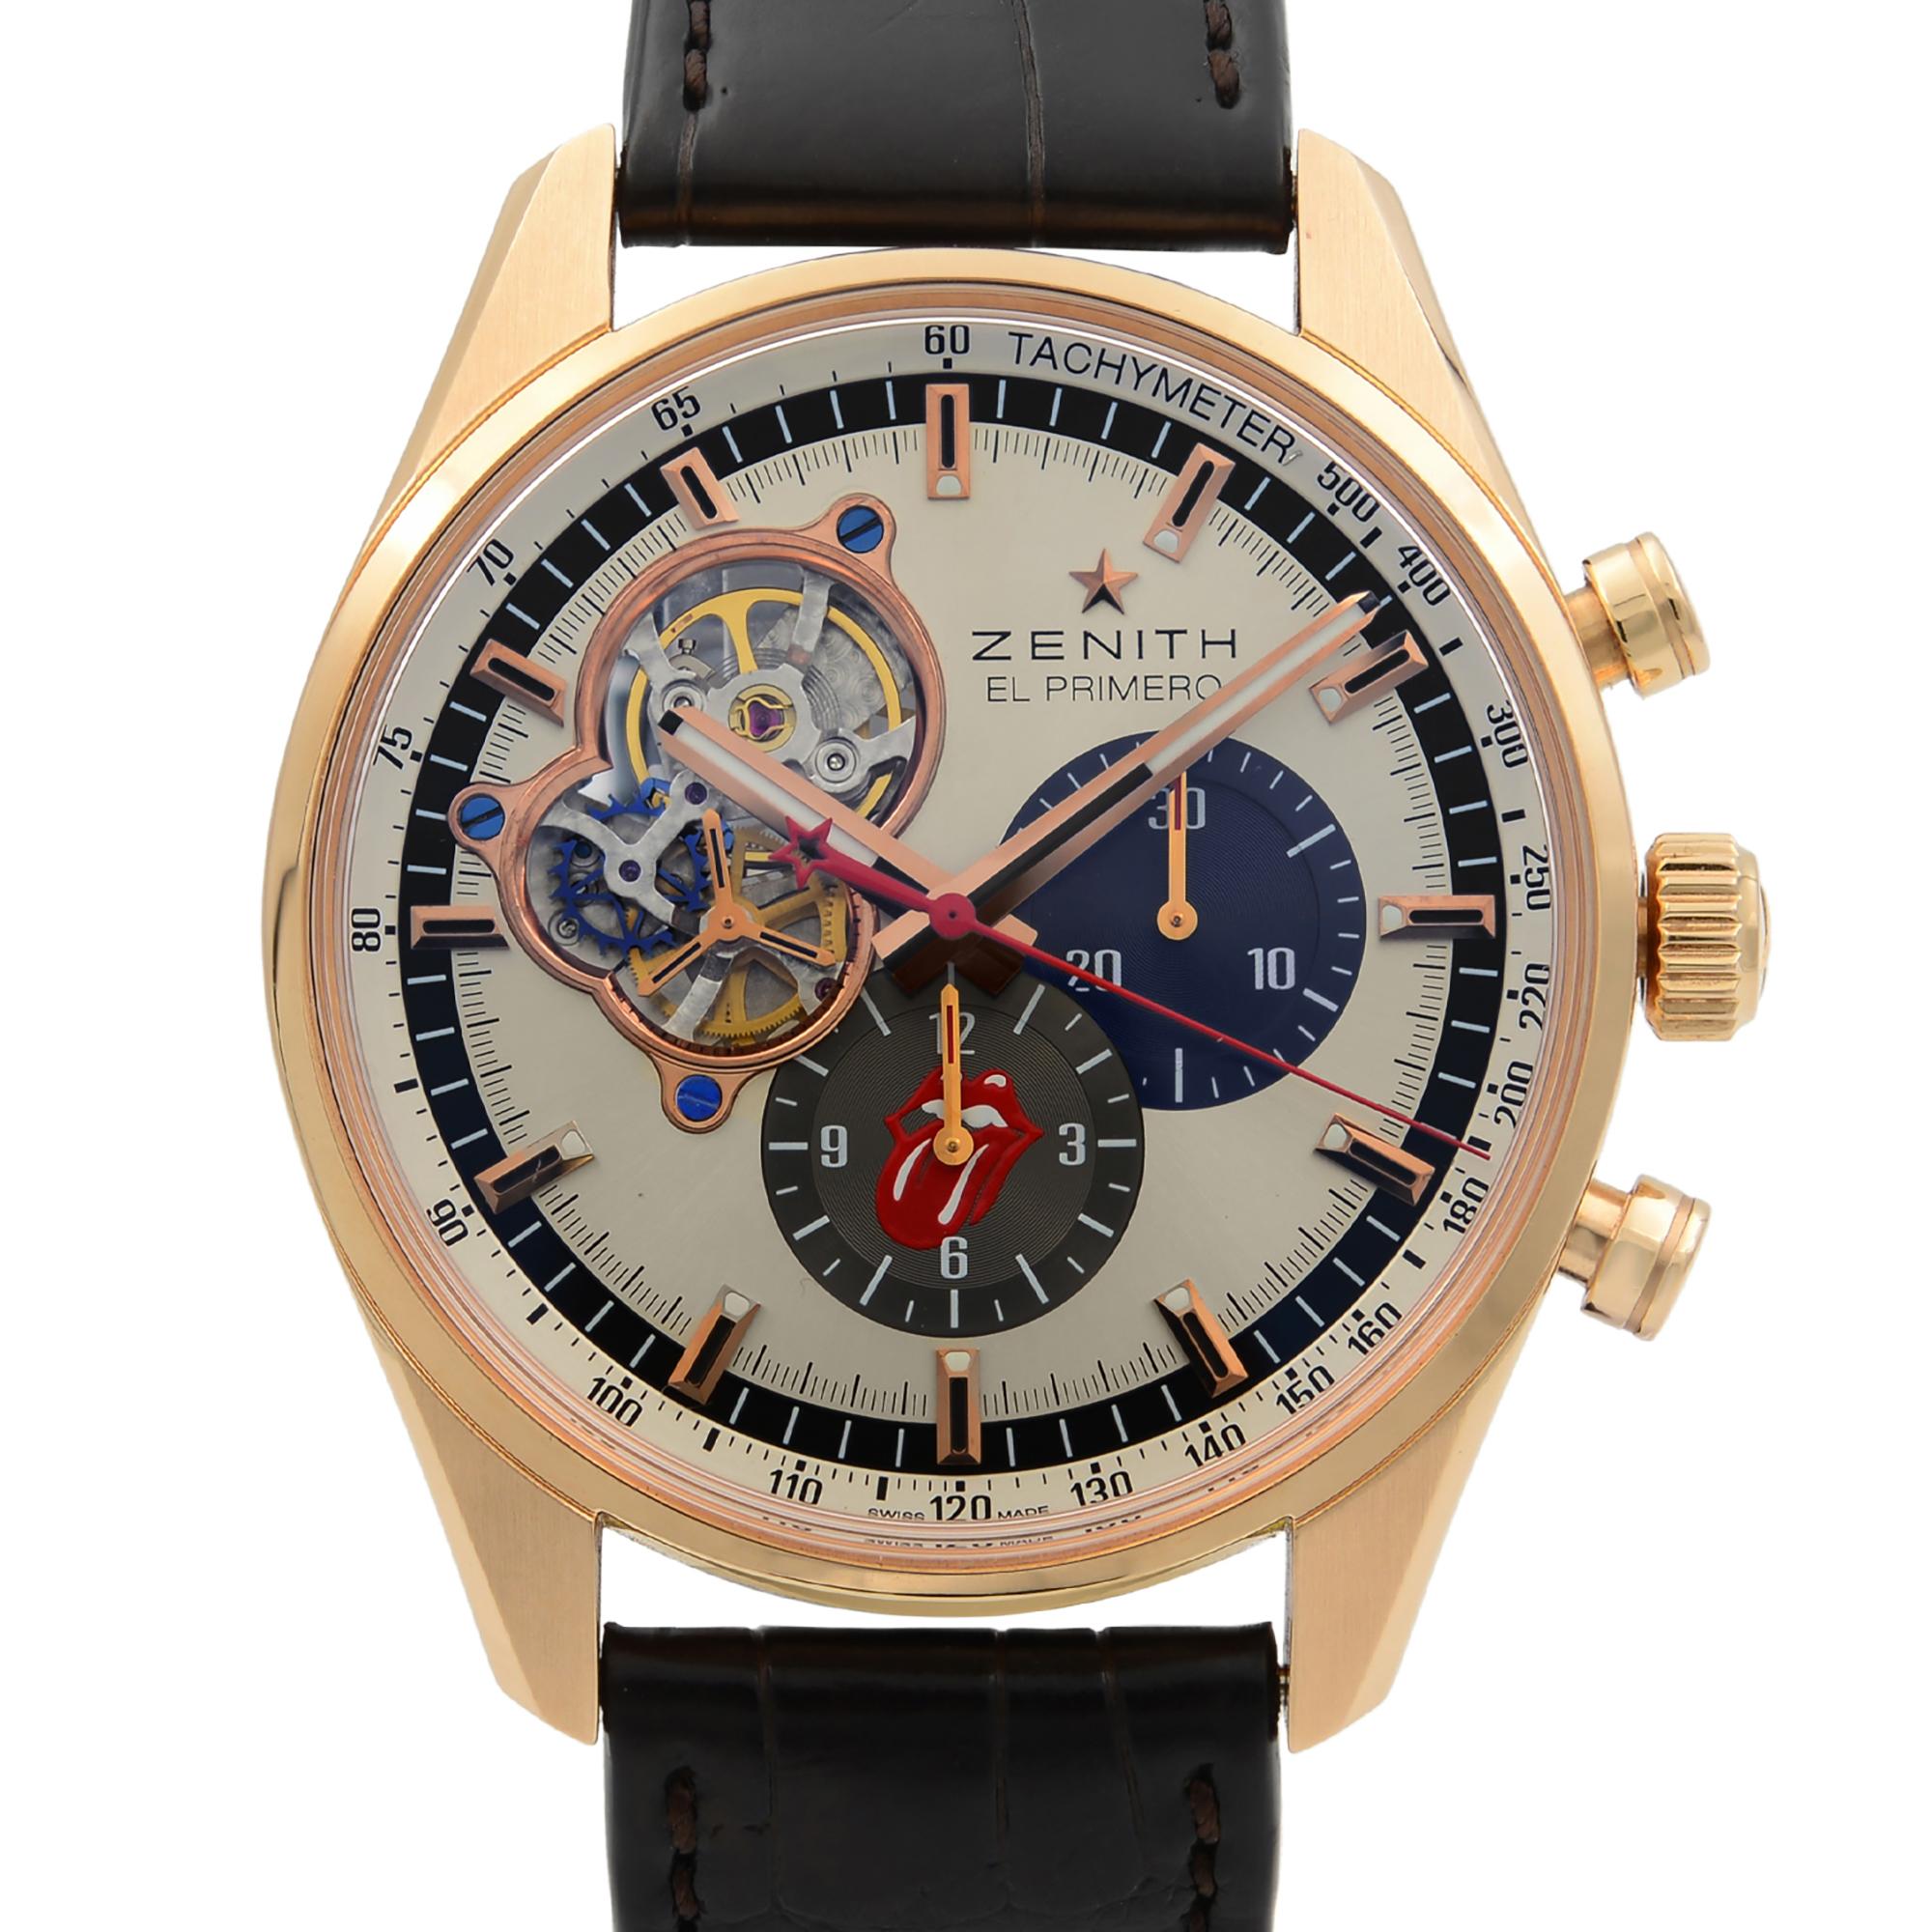 Details:
MSRP 21900
Brand Zenith
Department Men
Model Number 18.2041.4061/77.C494
Model Zenith El Primero
Style Dress/Formal, Luxury
Band Color Black
Dial Color Silver
Case Color Gold
Display Analog
Dial Style Multi Dial, Non-Numeric Hour Marks
Case